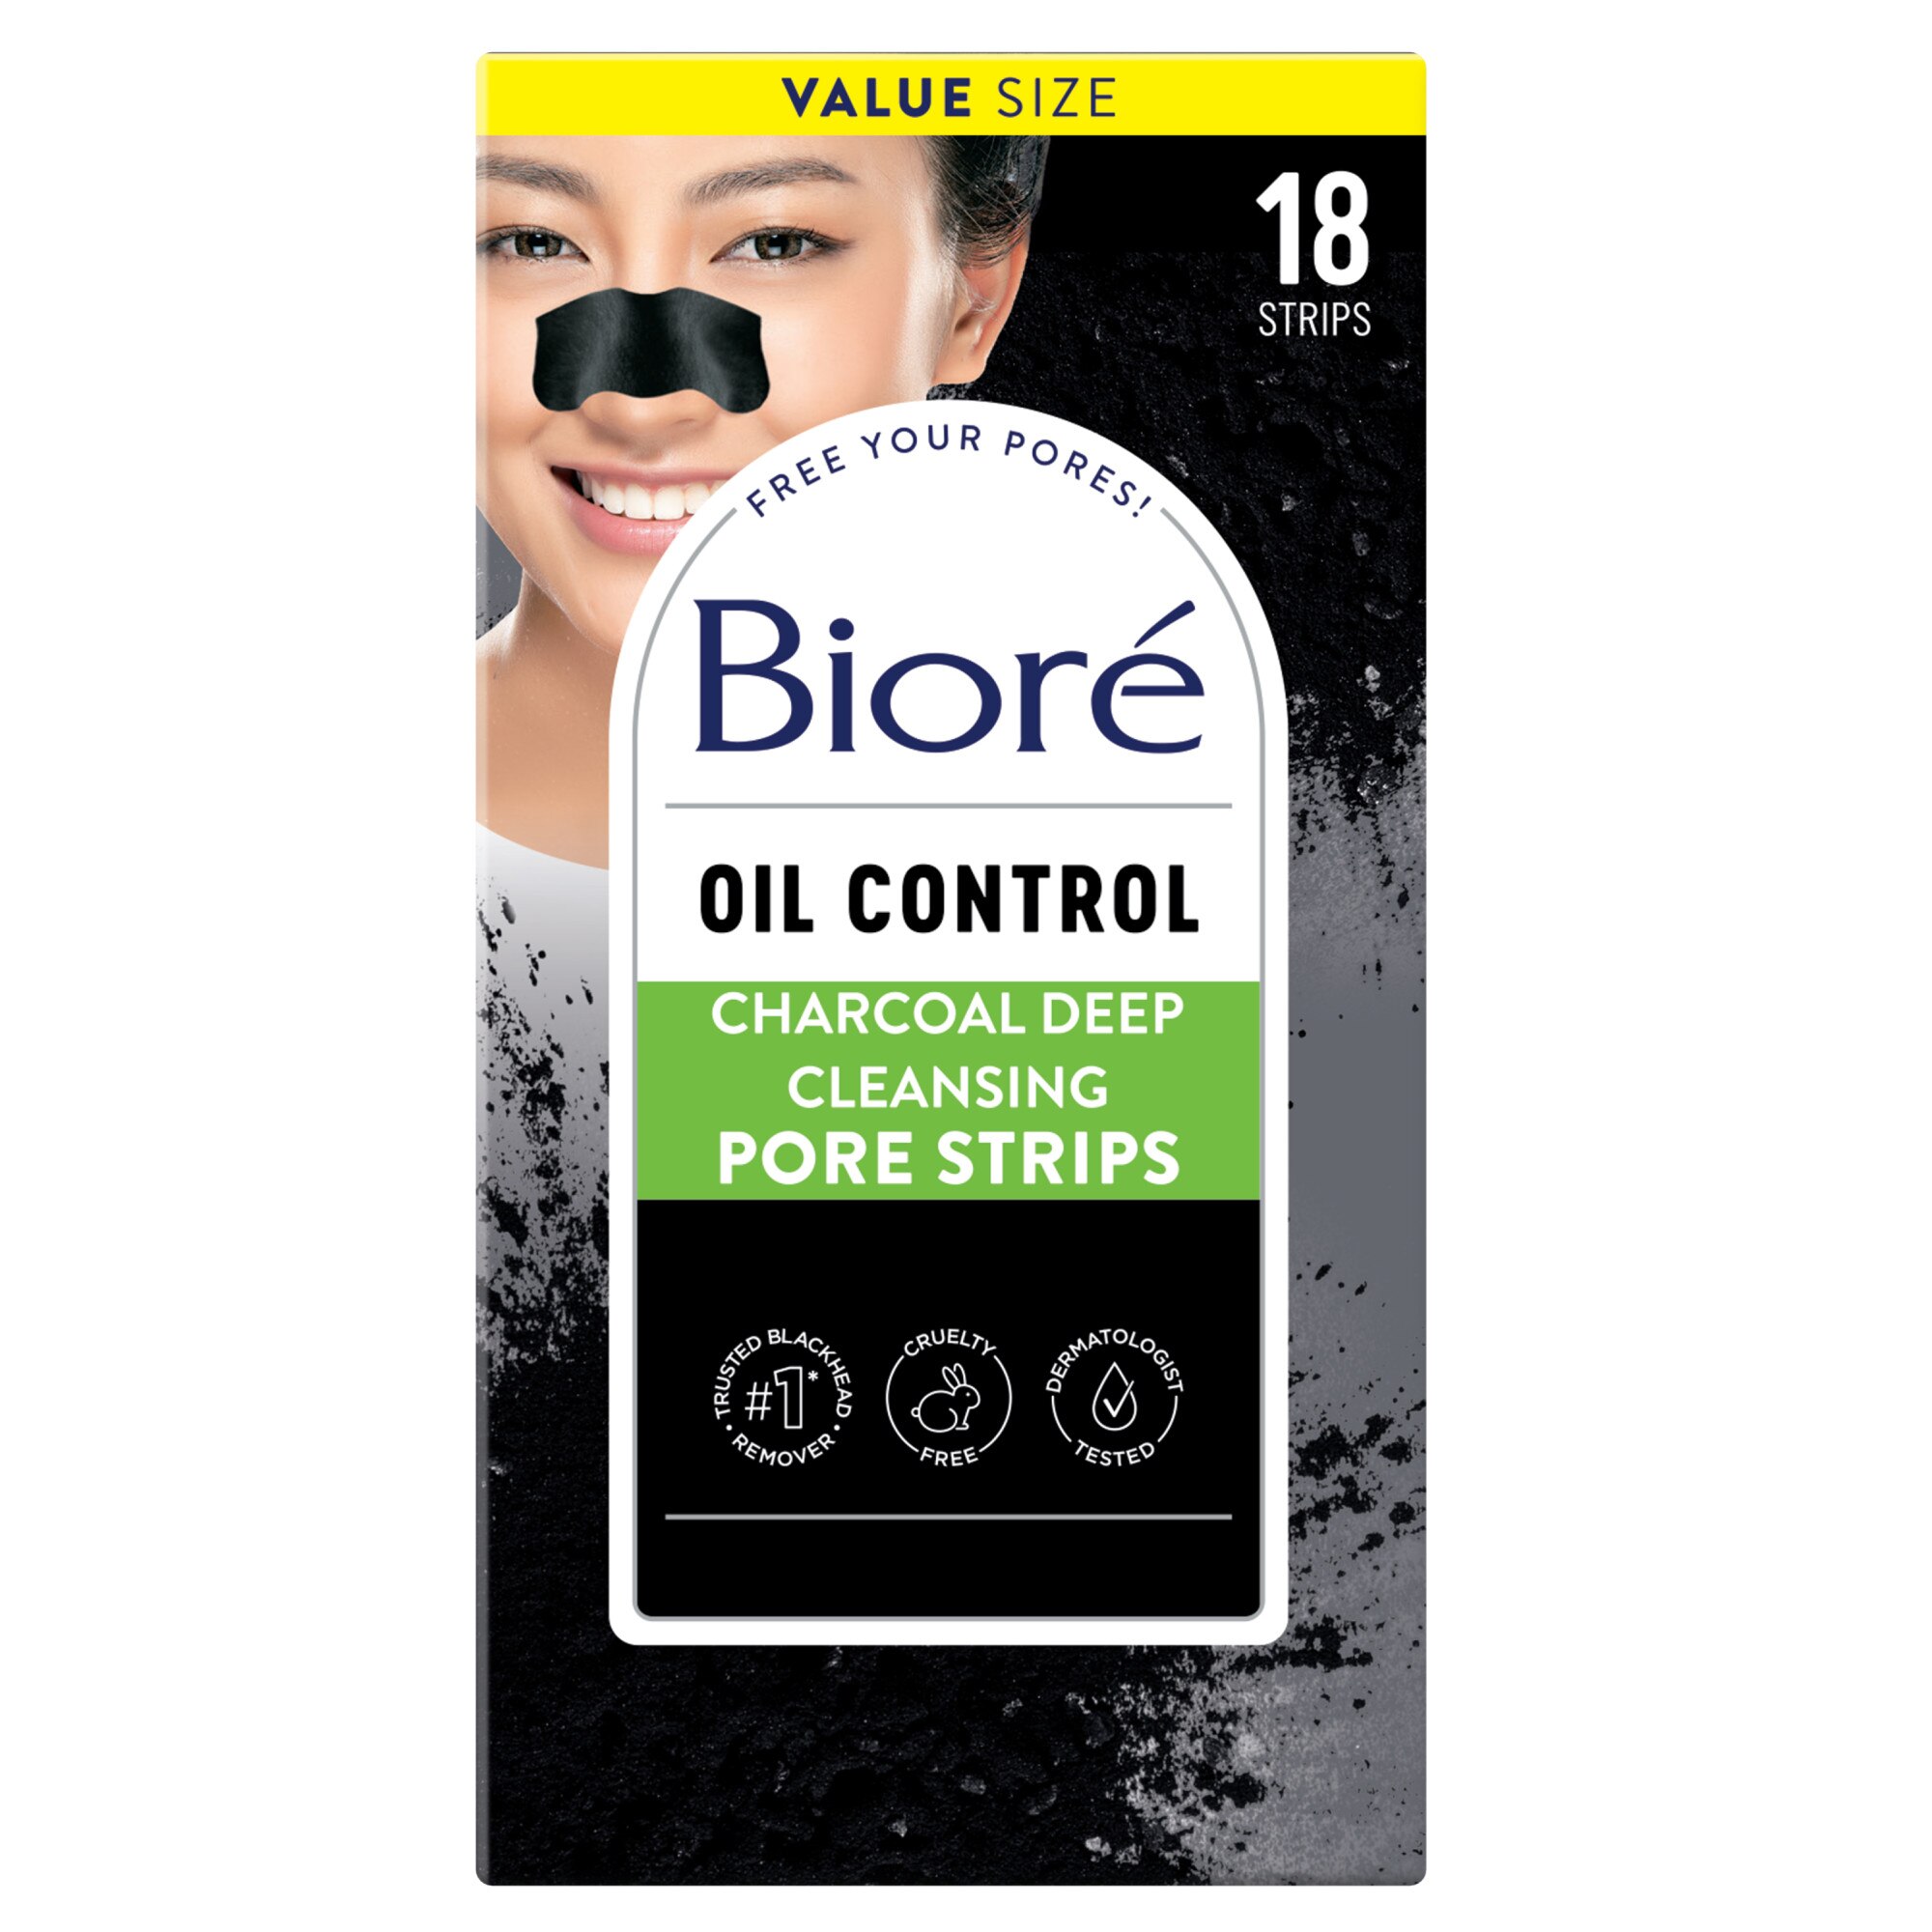 Biore Value Size Deep Cleansing Charcoal Pore Strips